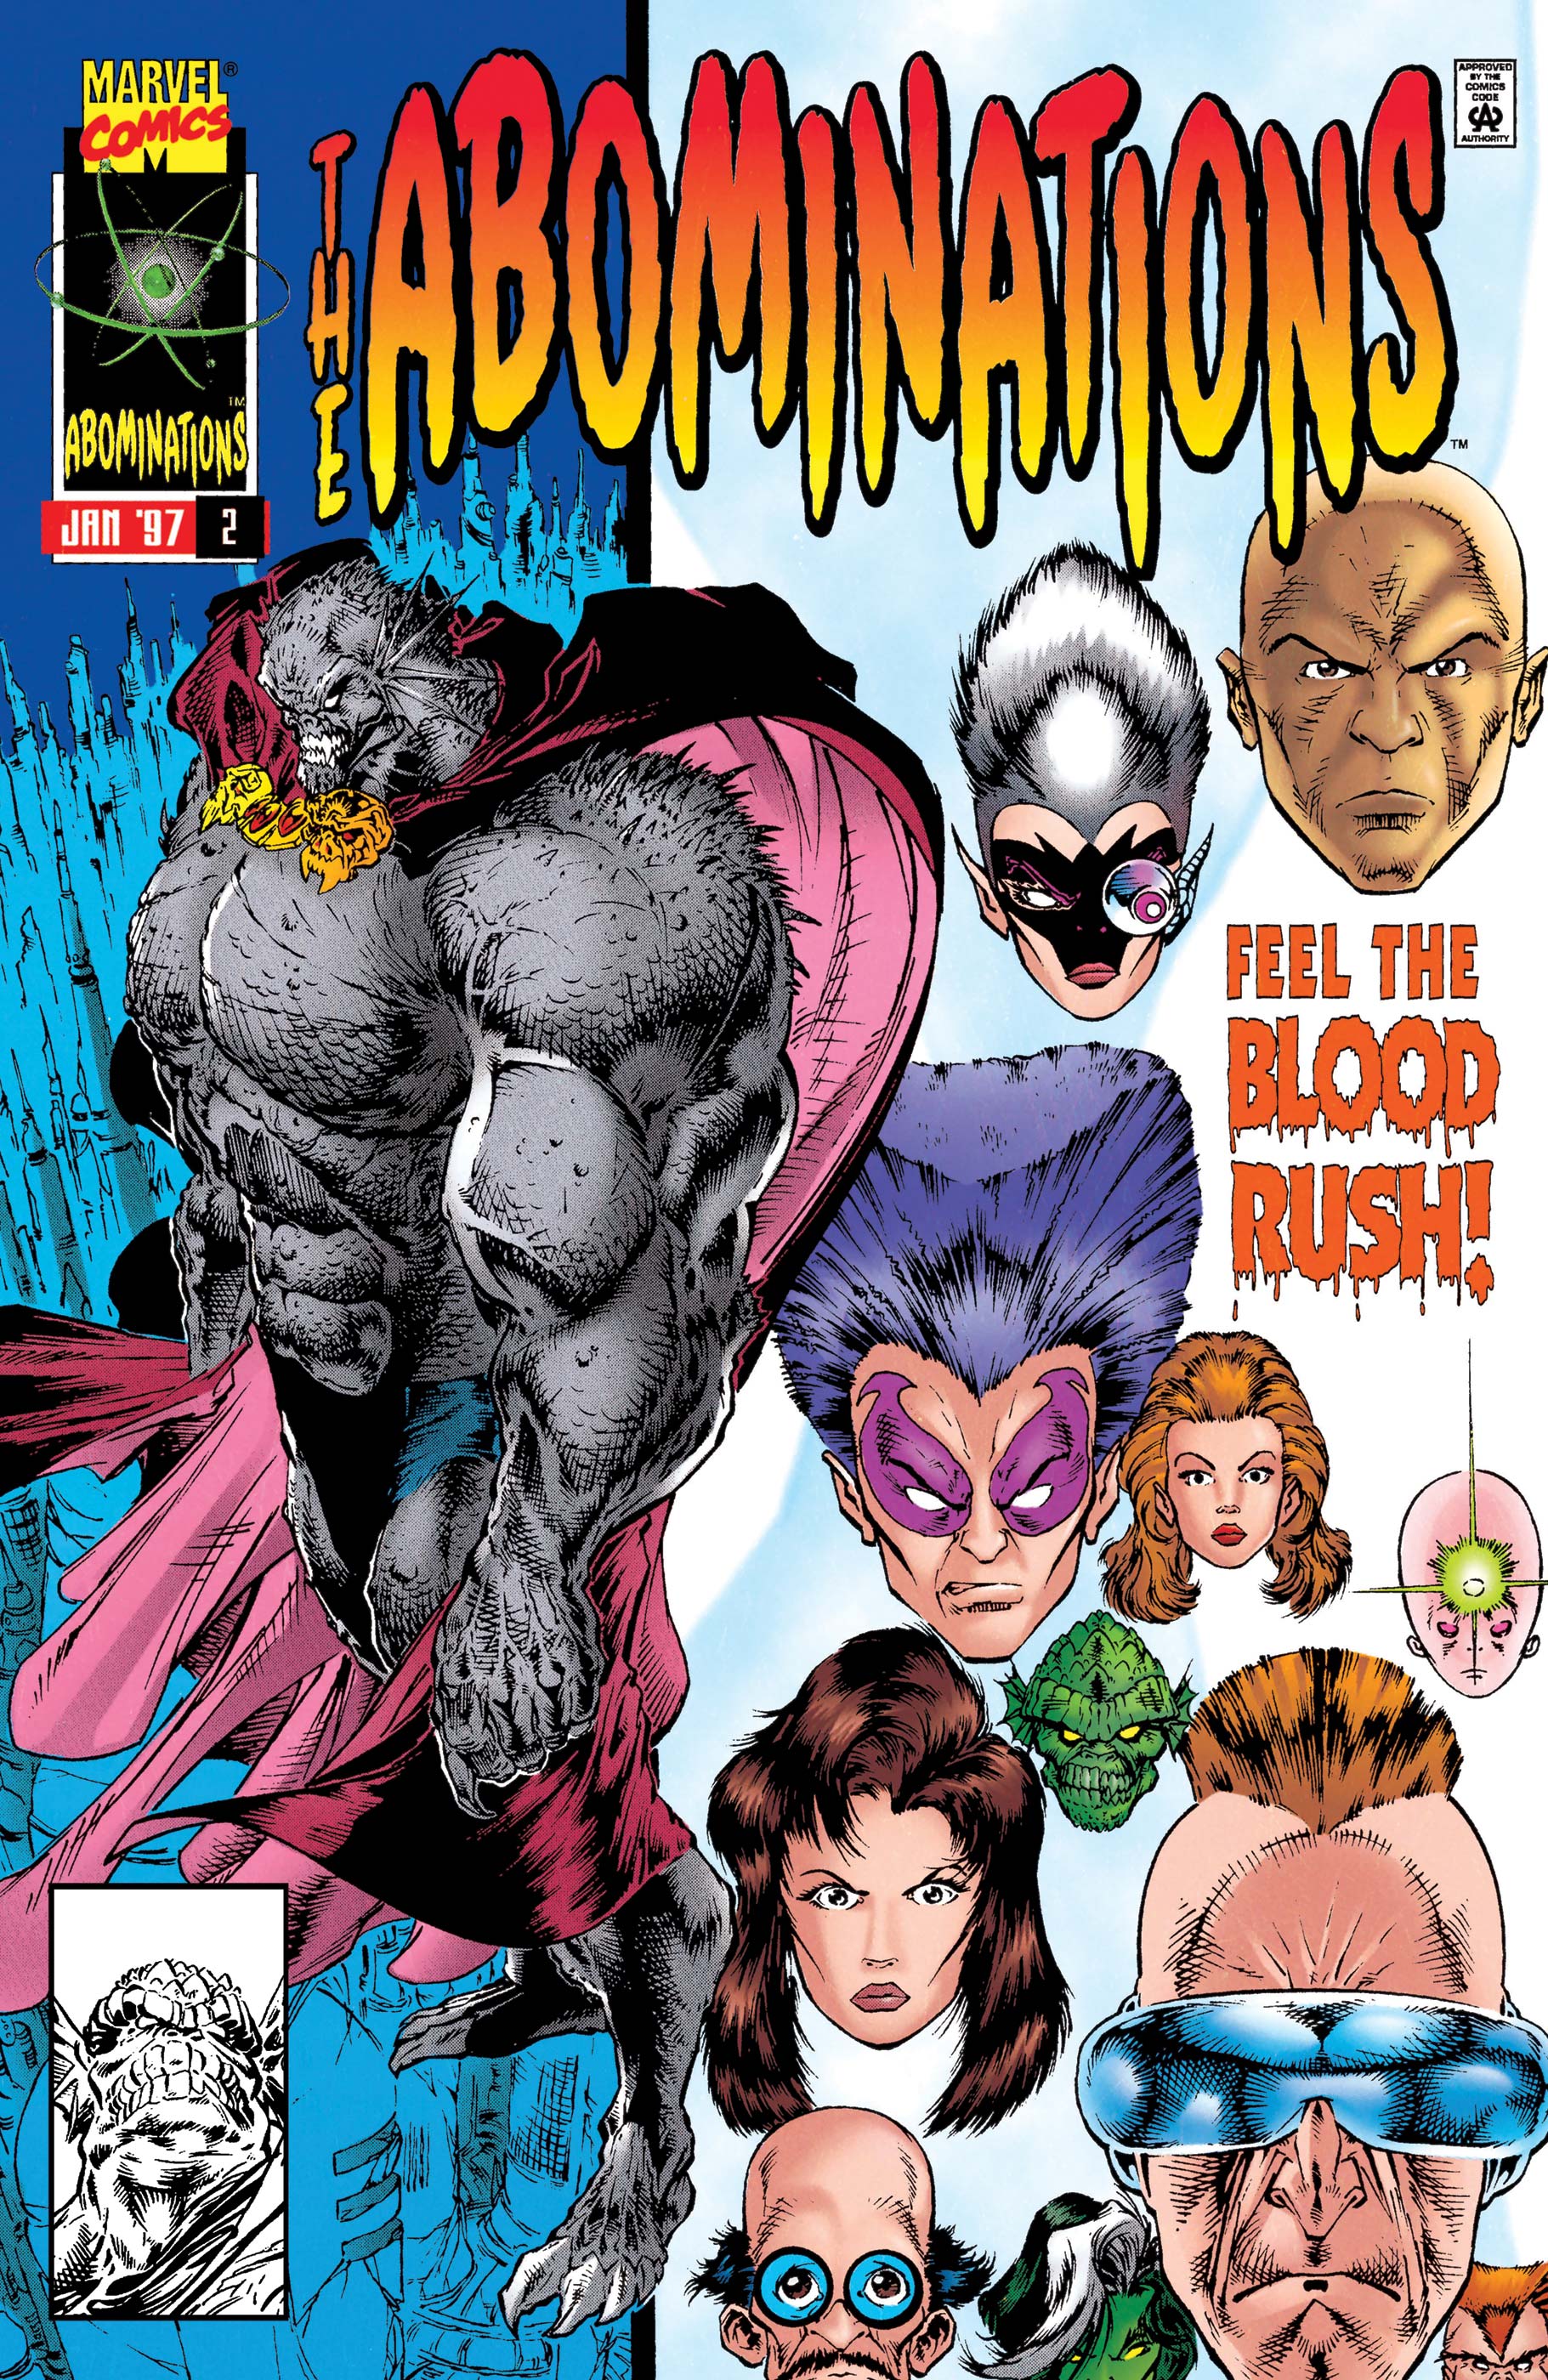 Abominations (1996) #2